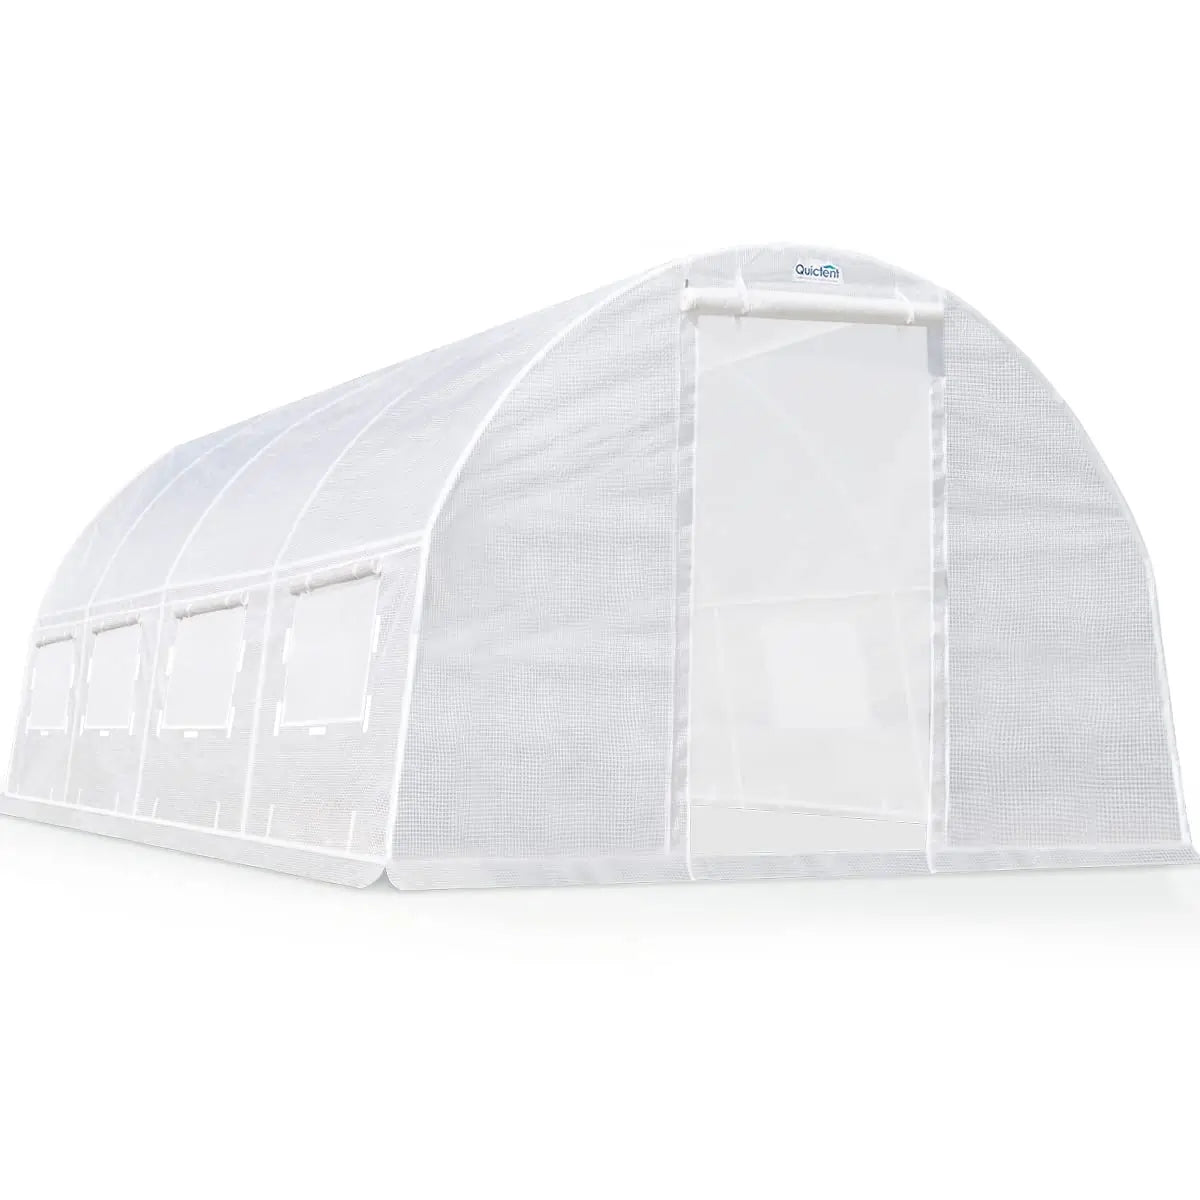 upgraded white greenhouse#color_white (Upgraded)